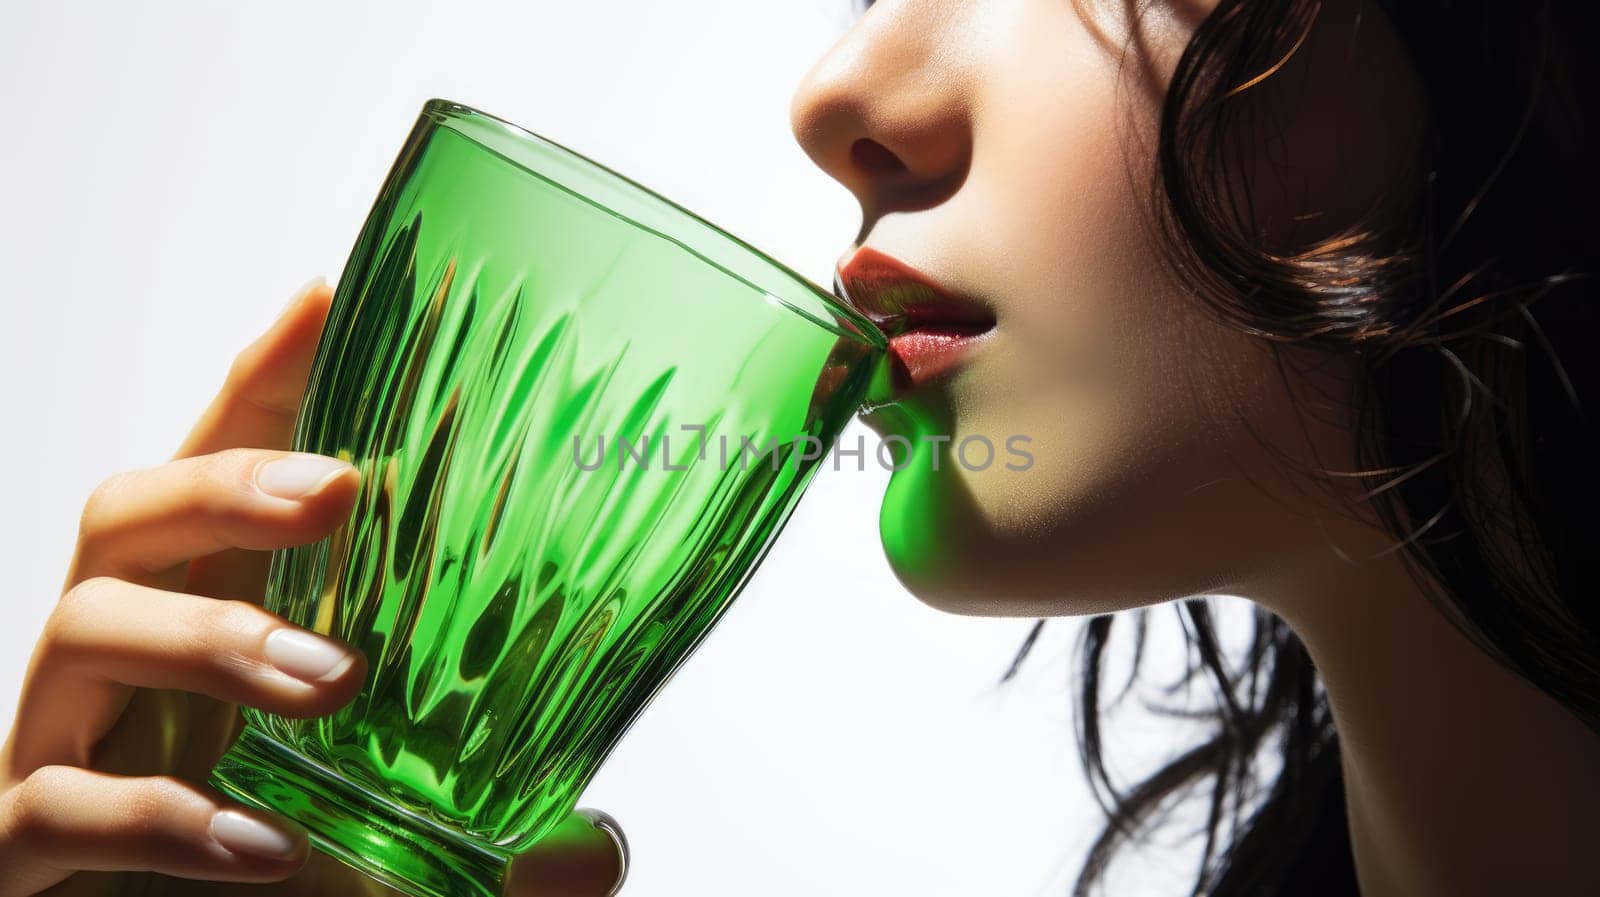 Beautiful brunette woman enjoying drink from green glass at the cozy bar celebrating St Patricks Day by JuliaDorian